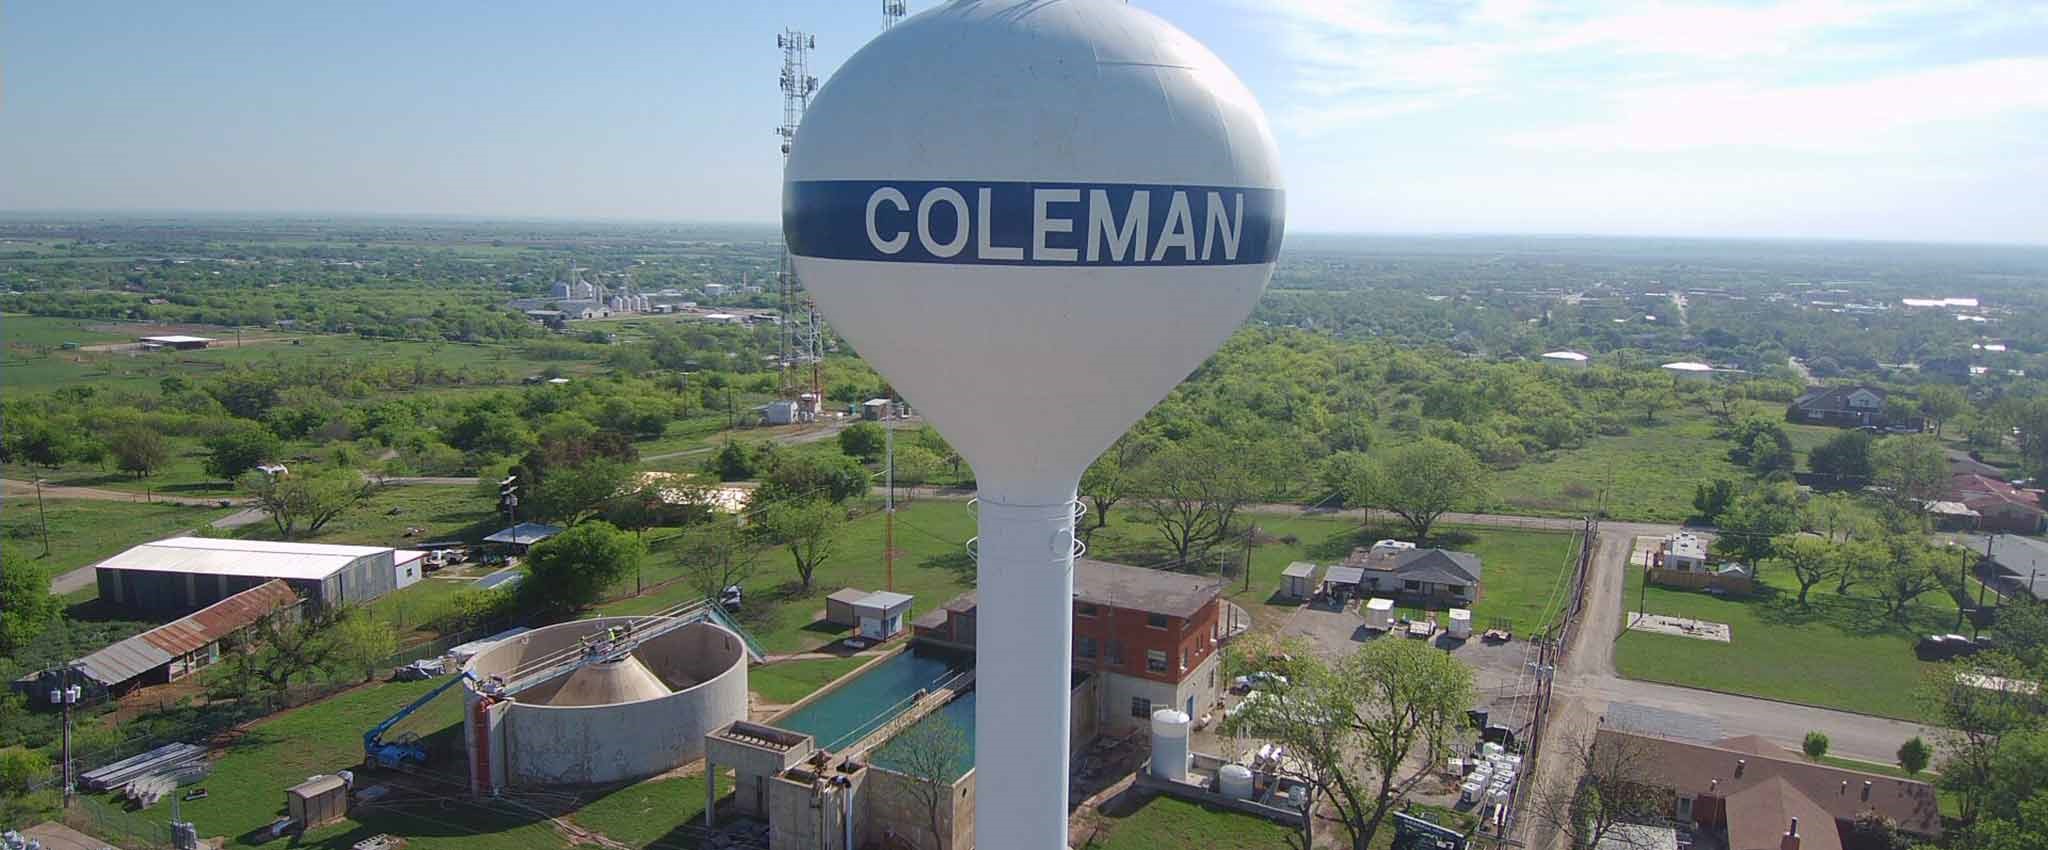 to the City of Coleman, Texas